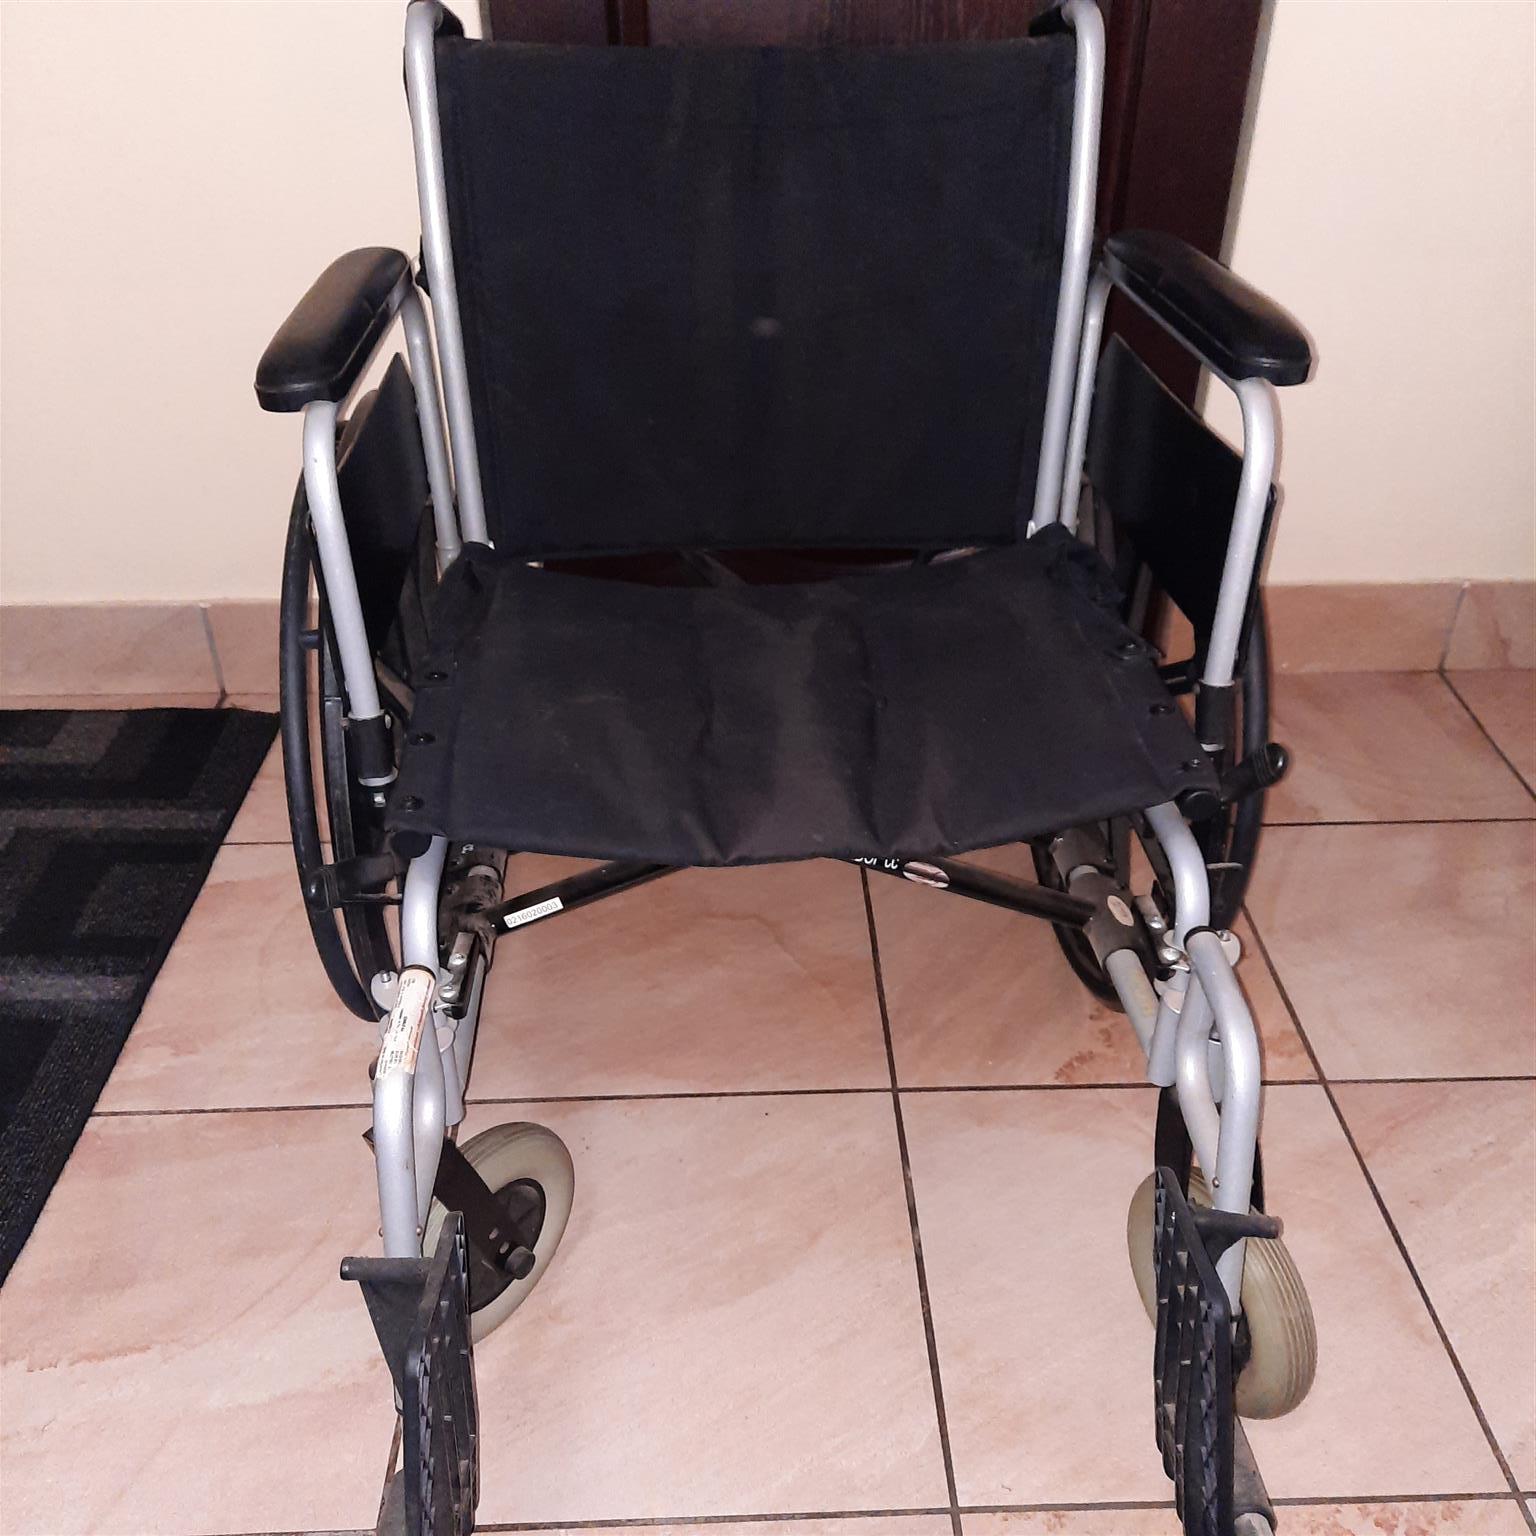 Wheel chair extra heavy duty (150kg max). Used three times. Still in mint condit